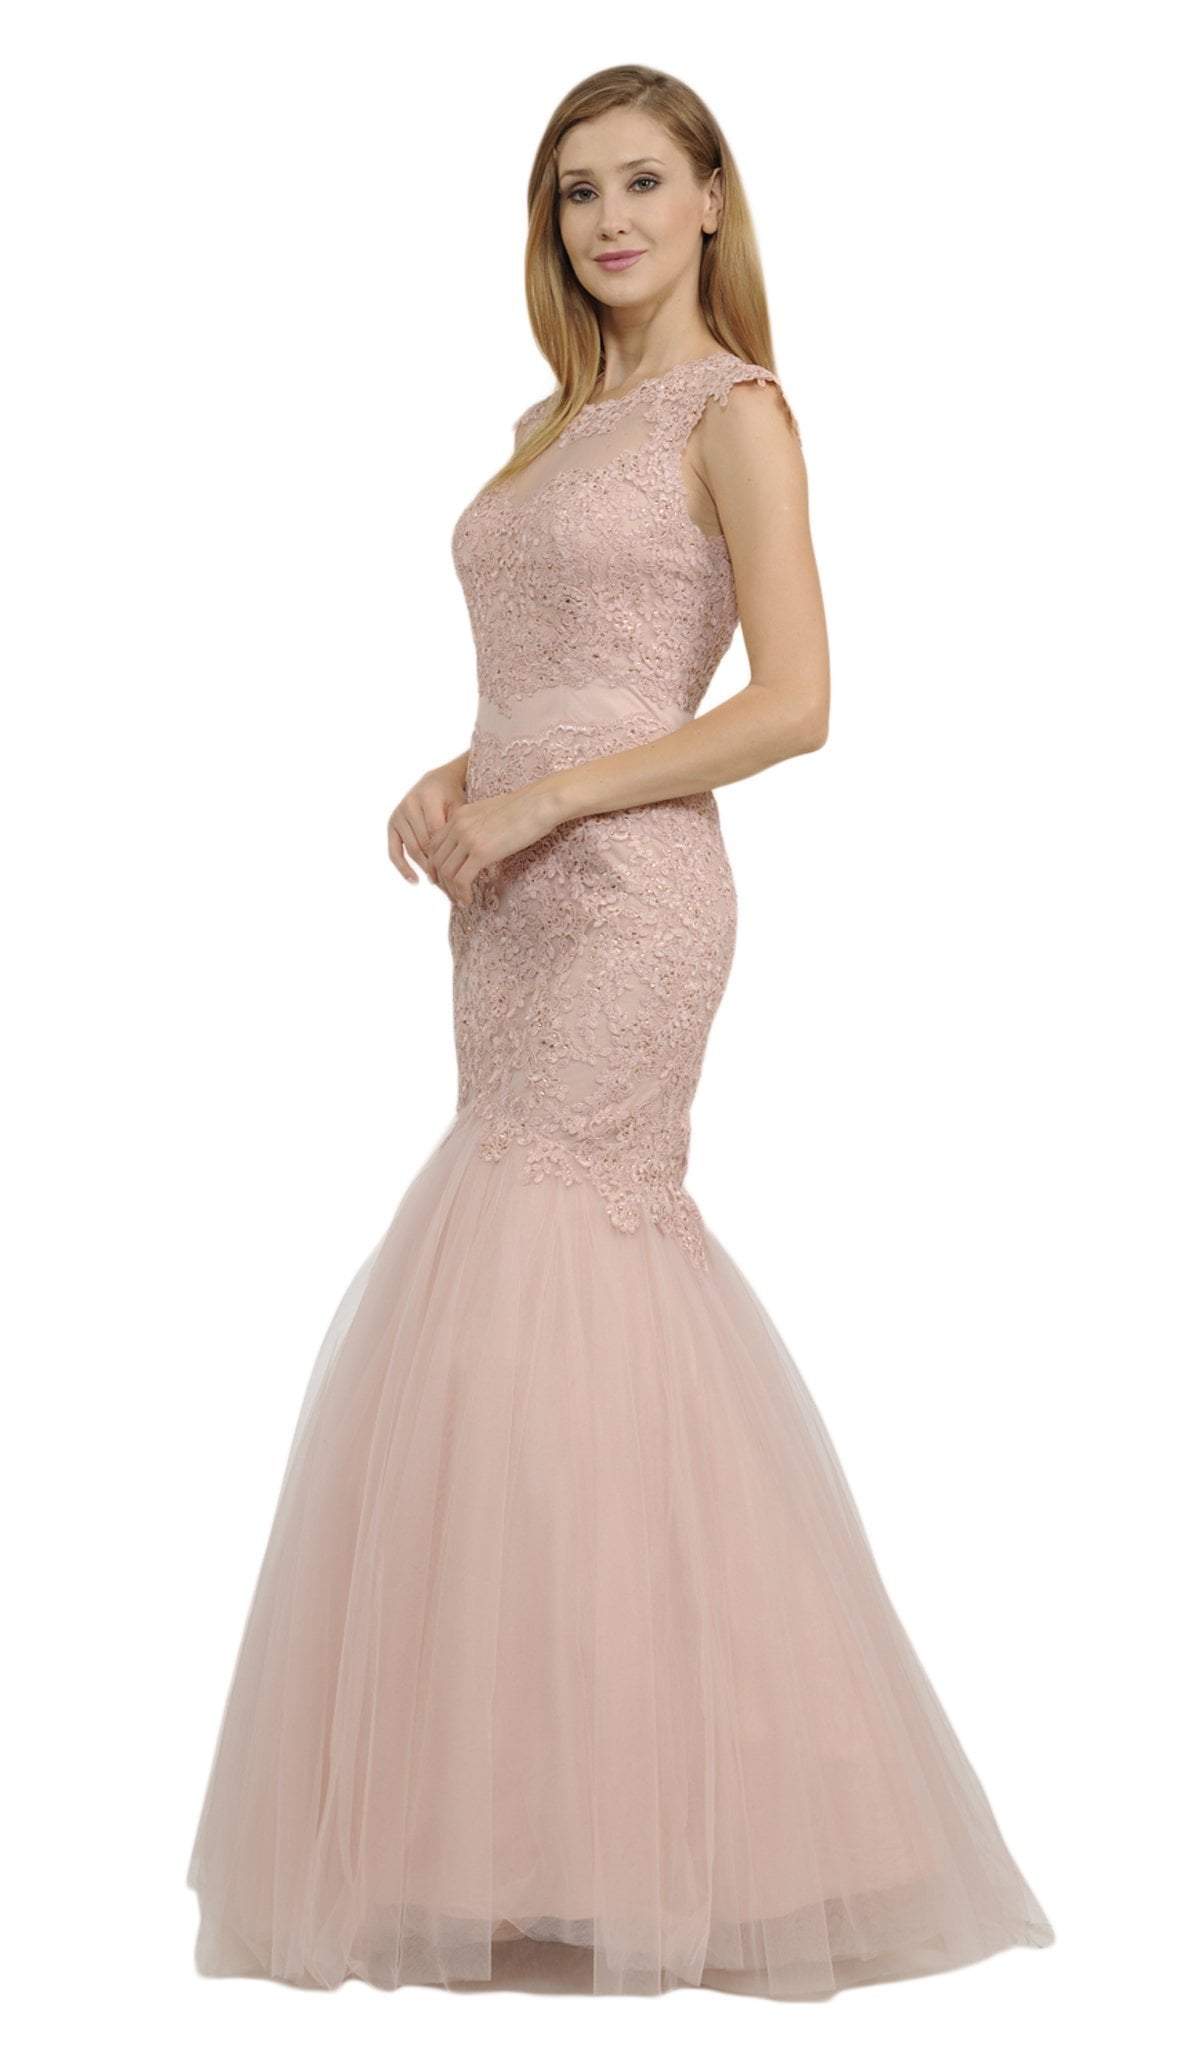 Image of Poly USA - 8226 Cap Sleeve Appliqued Illusion Cutout Mermaid Gown